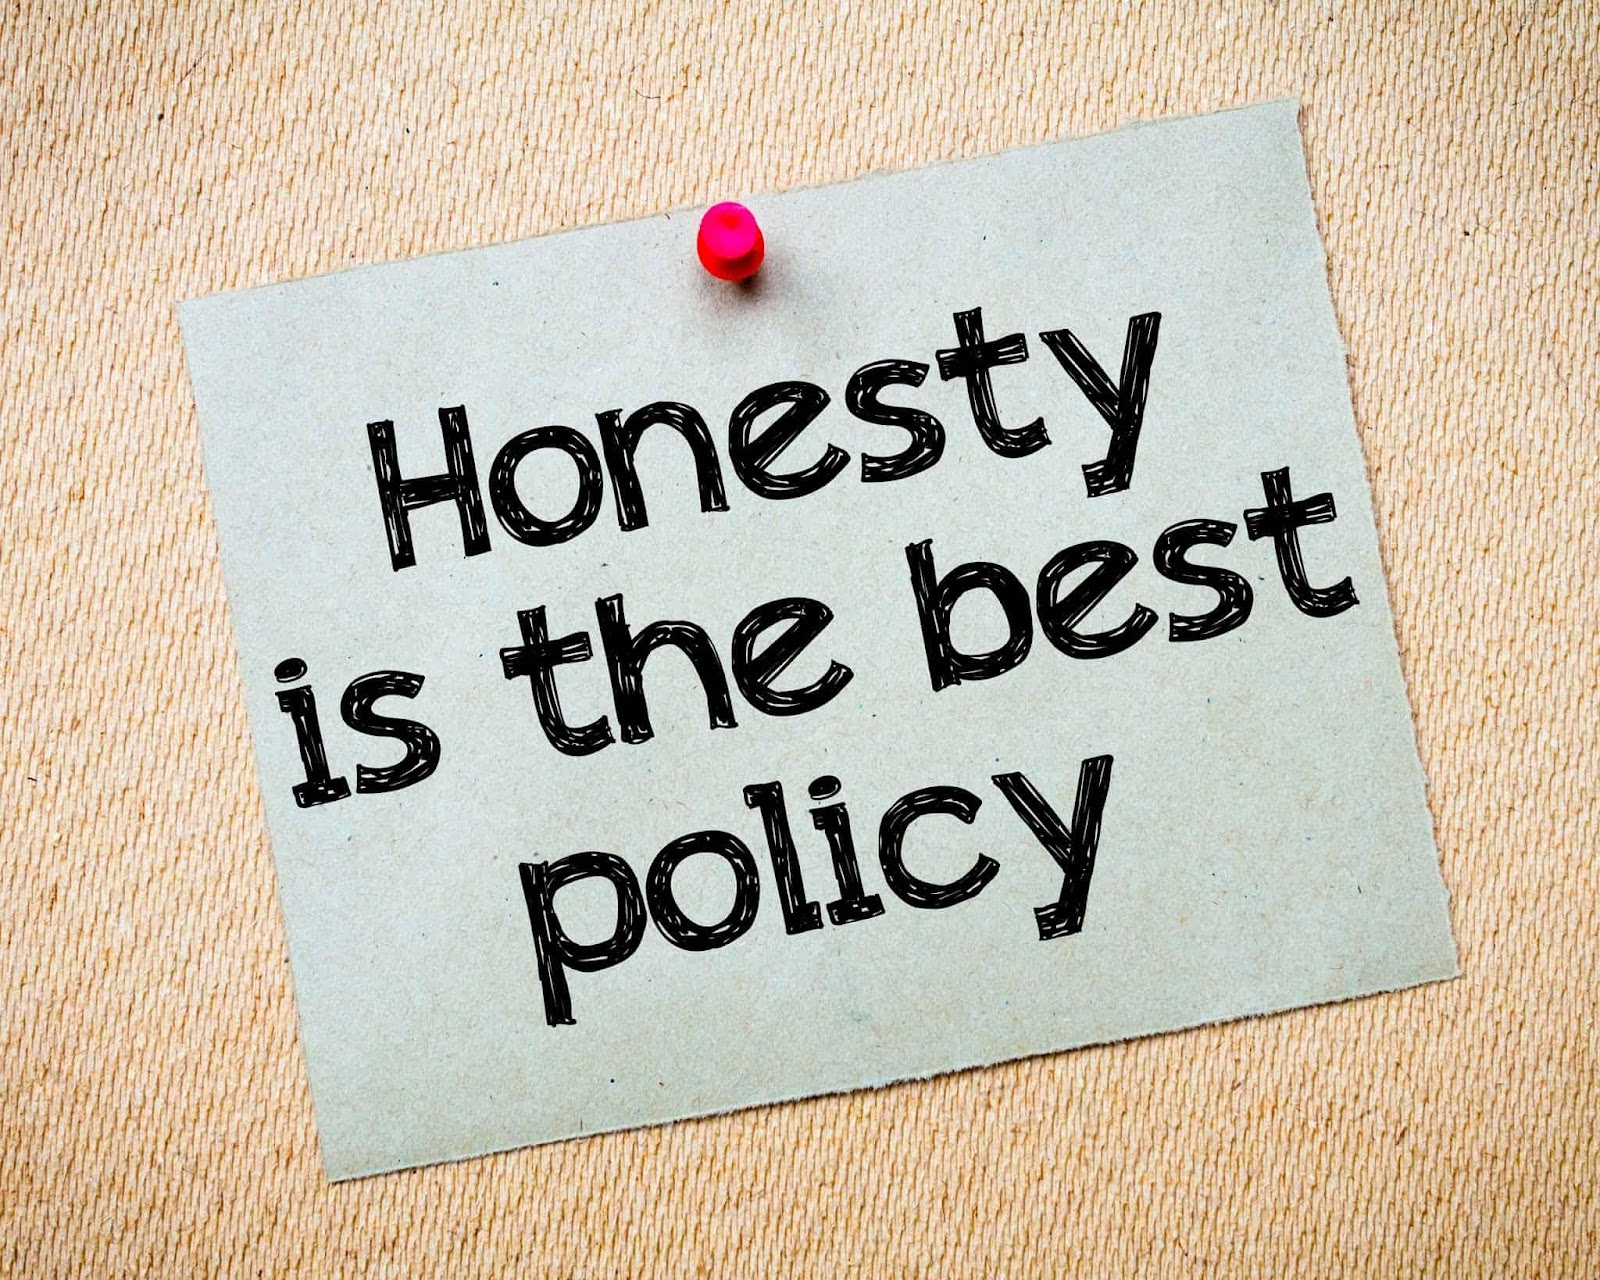 Honesty in communication means you are straightforward in expressing truth without misleading 